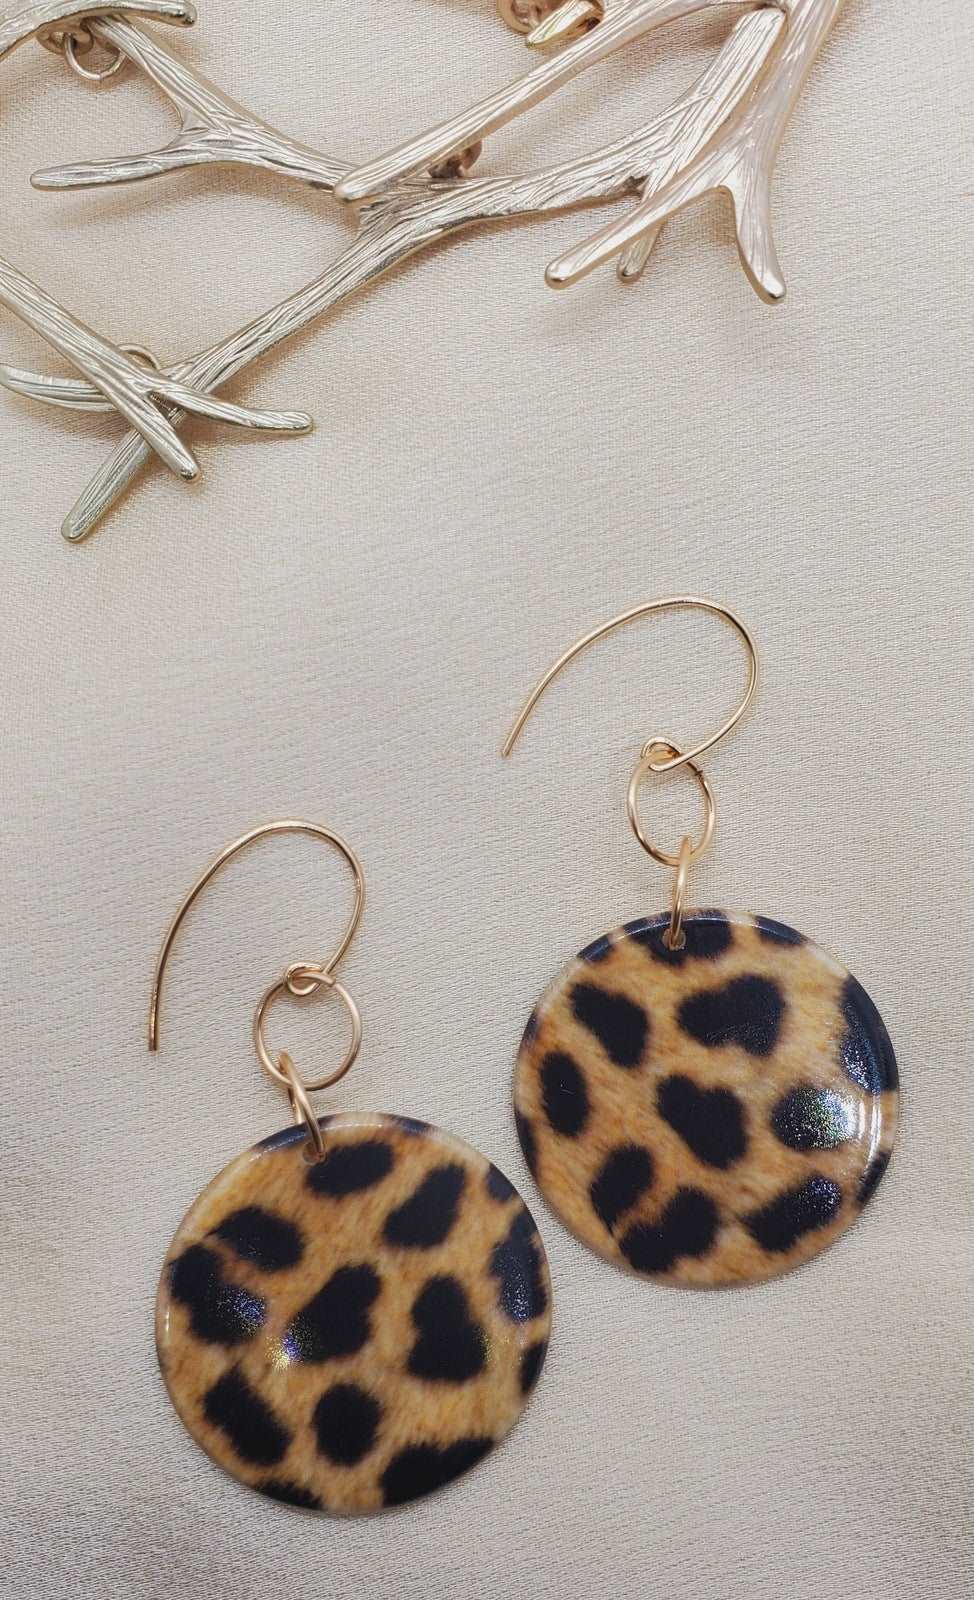 Printed earrings with gold branches, Jiana Deon Earrings, earrings for women, Leo Dangle Earrings